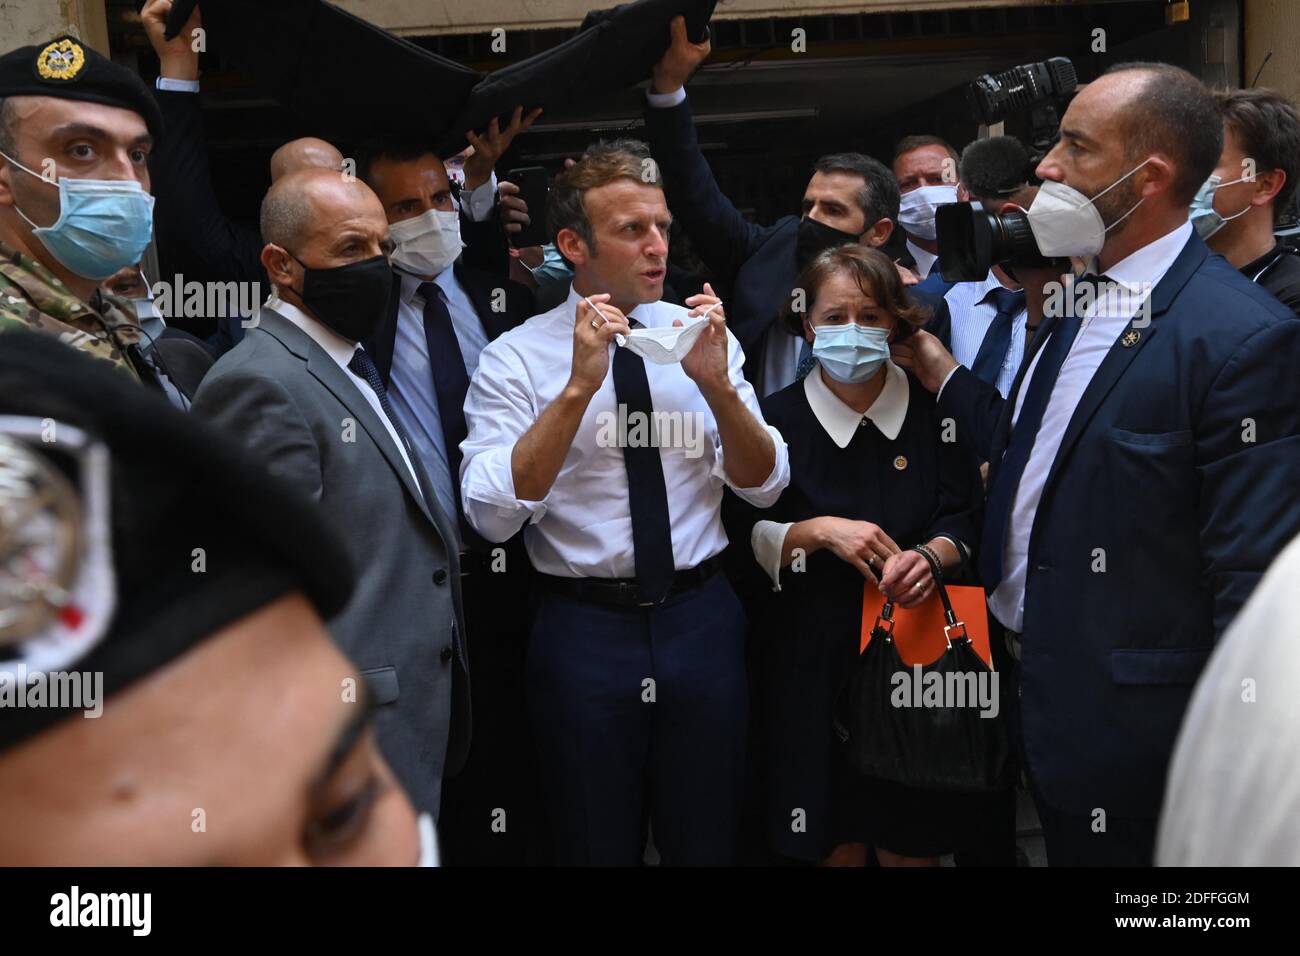 French President Emmanuel Macron amid heavy security forces visiting the Gemmayze district in Beirut, Lebanon on August 6, 2020 to express support for Lebanon in the wake of a massive explosion that tore through the capital earlier this week. France has send emergency aid and search-and-rescue teams. Photo by Ammar Abd Rabbo/ABACAPRESS.COM Stock Photo